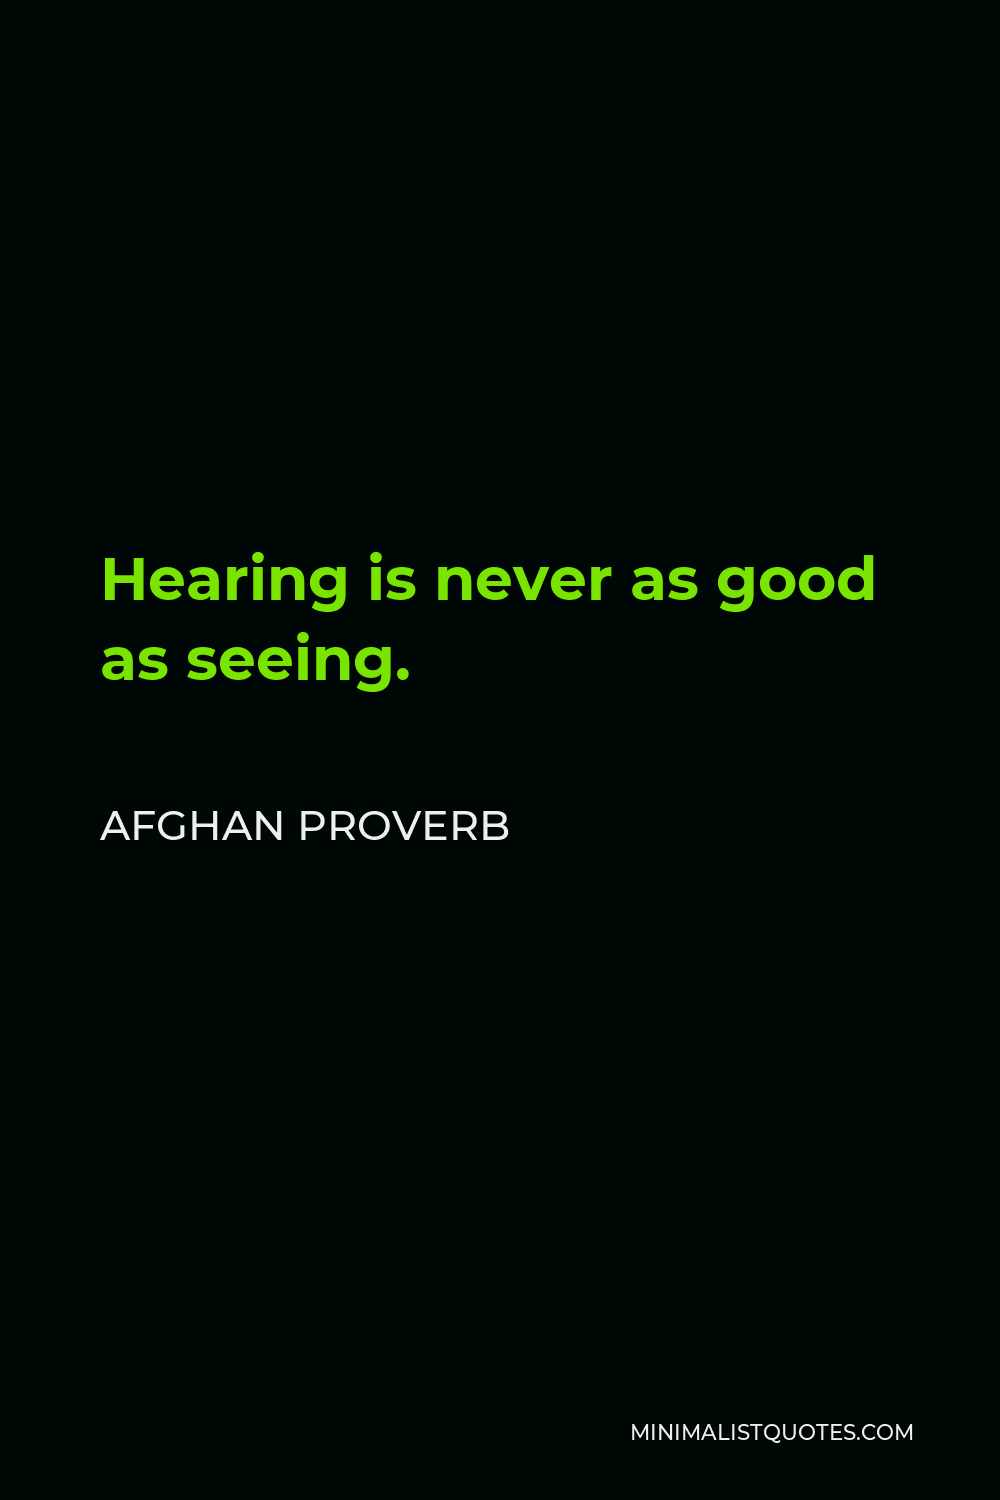 Afghan Proverb Quote - Hearing is never as good as seeing.